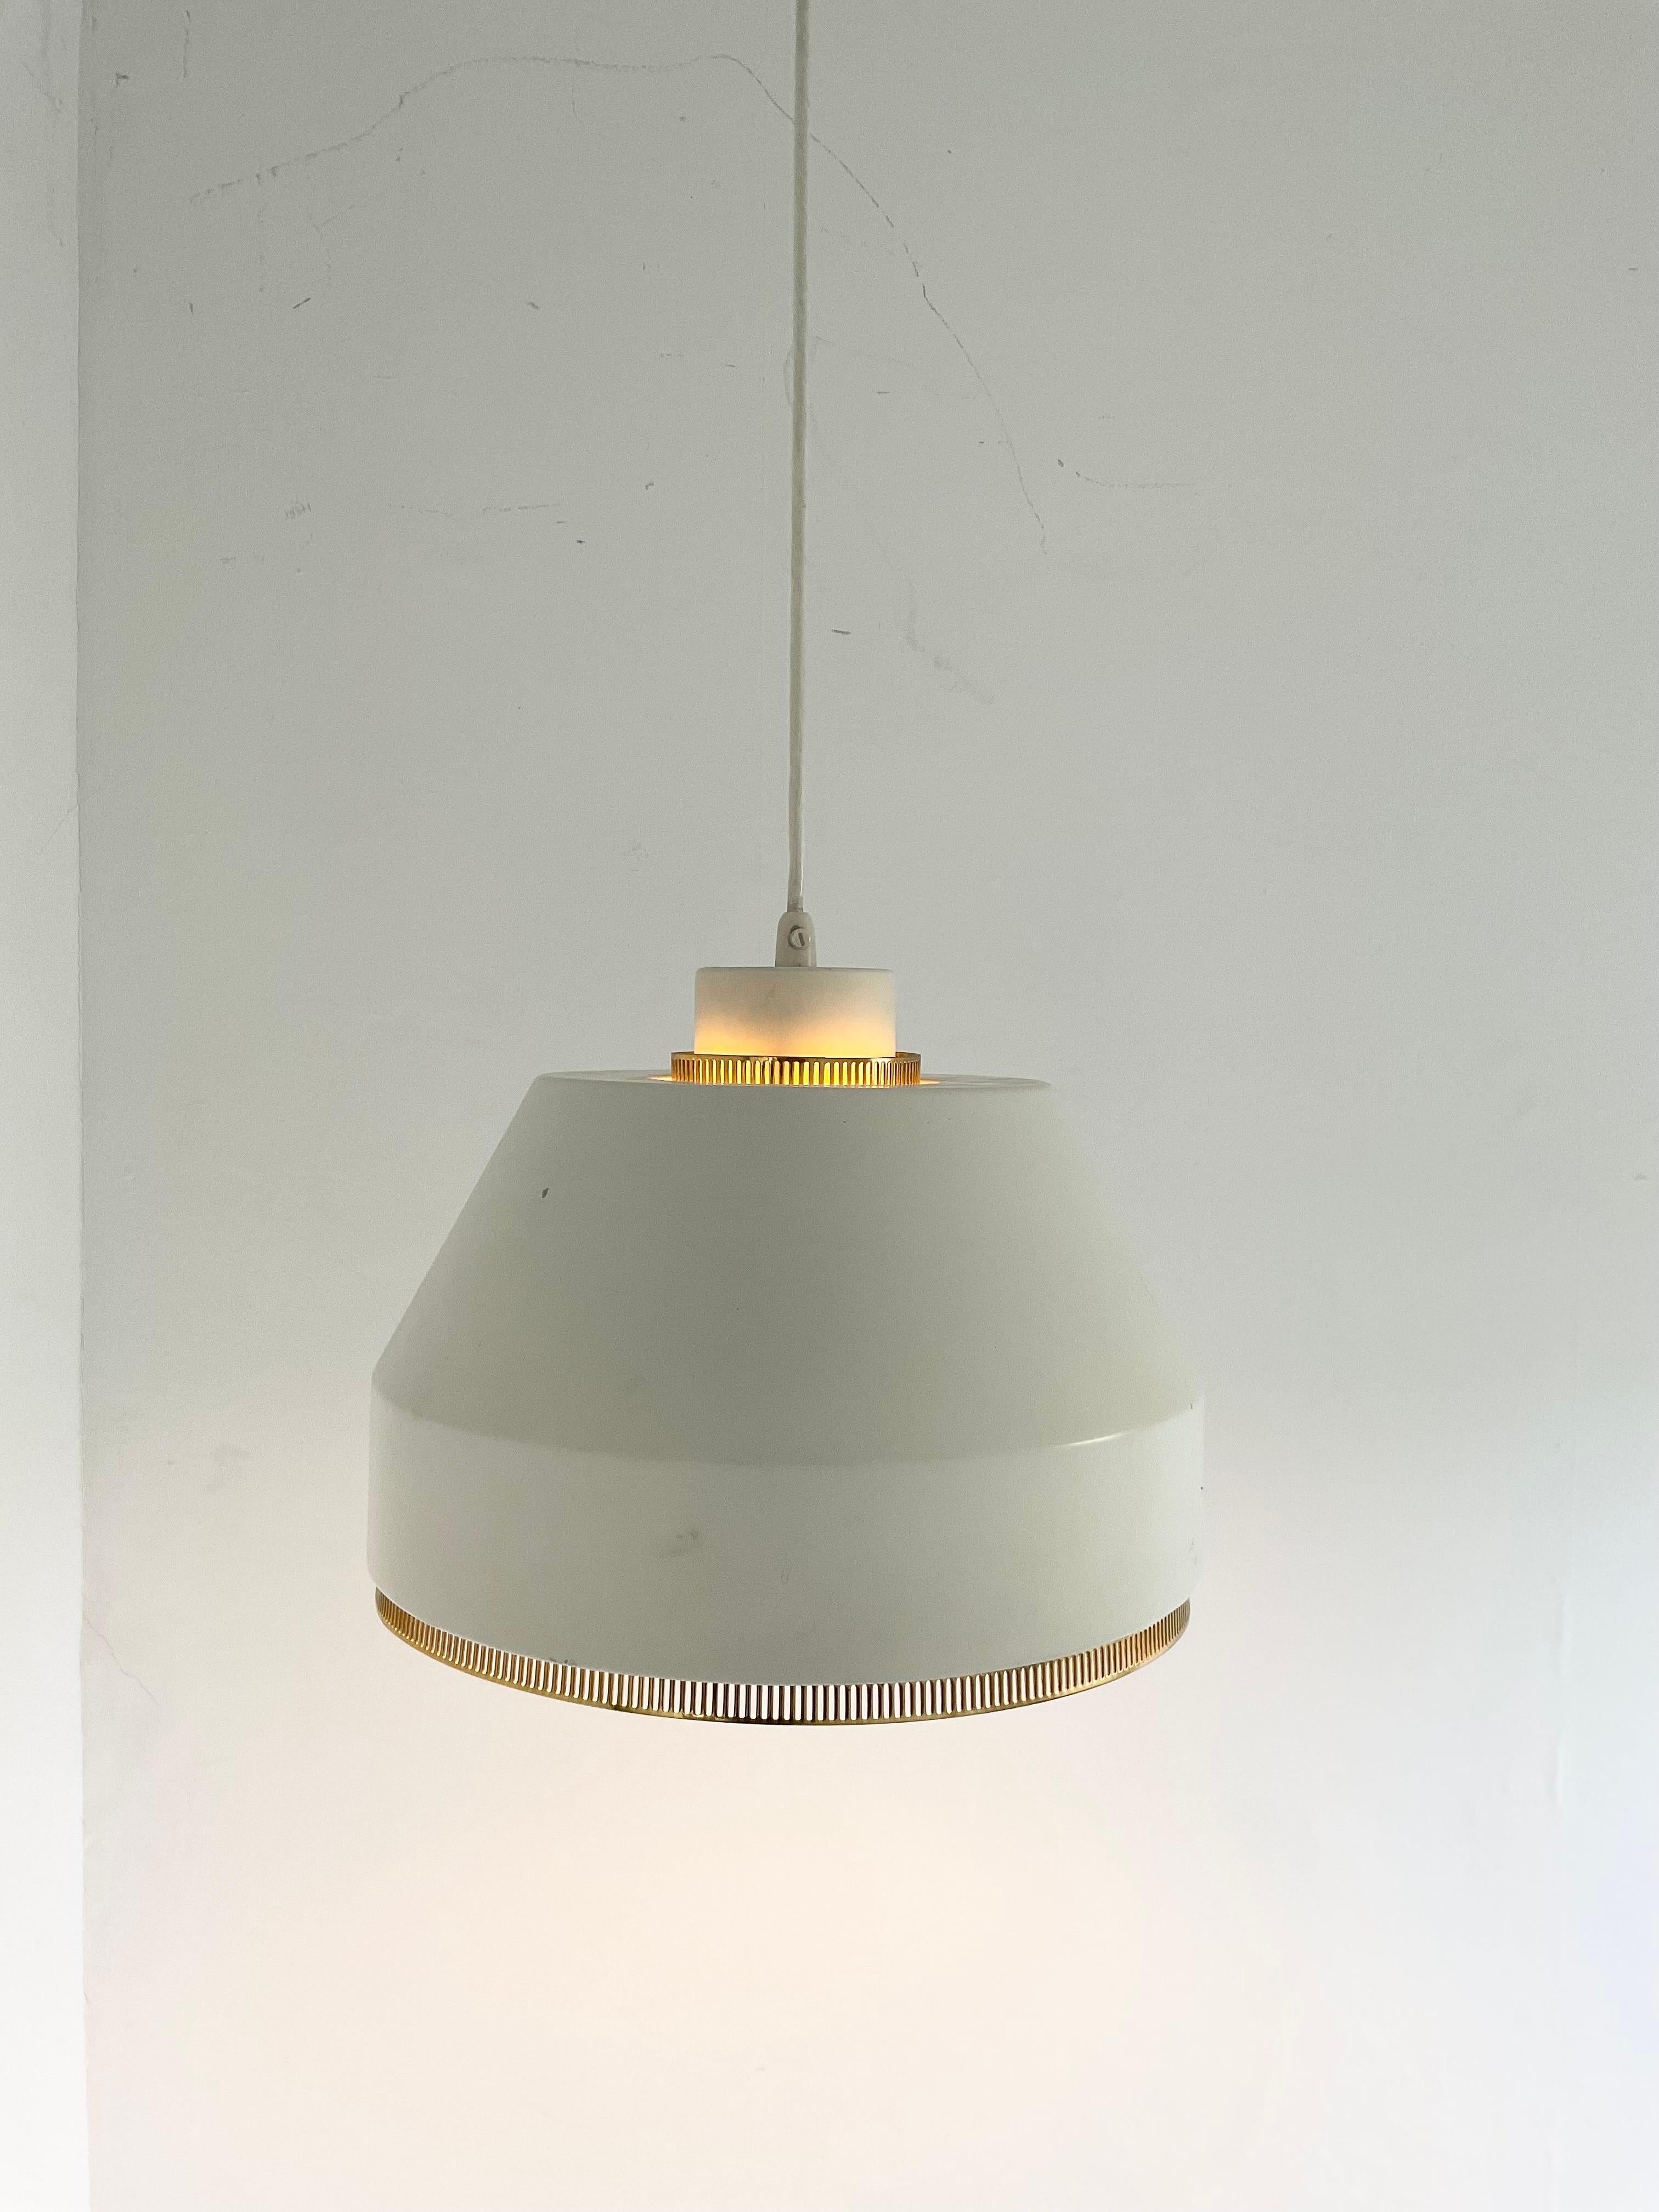 Pendant light 'AMA 500' with brass details by Aino Aalto, designed 1941. This piece was made by Valaistustyö of Finland.

The design features an aluminium shade painted in old white (warm tone) with delicate brass details. The open shade provides